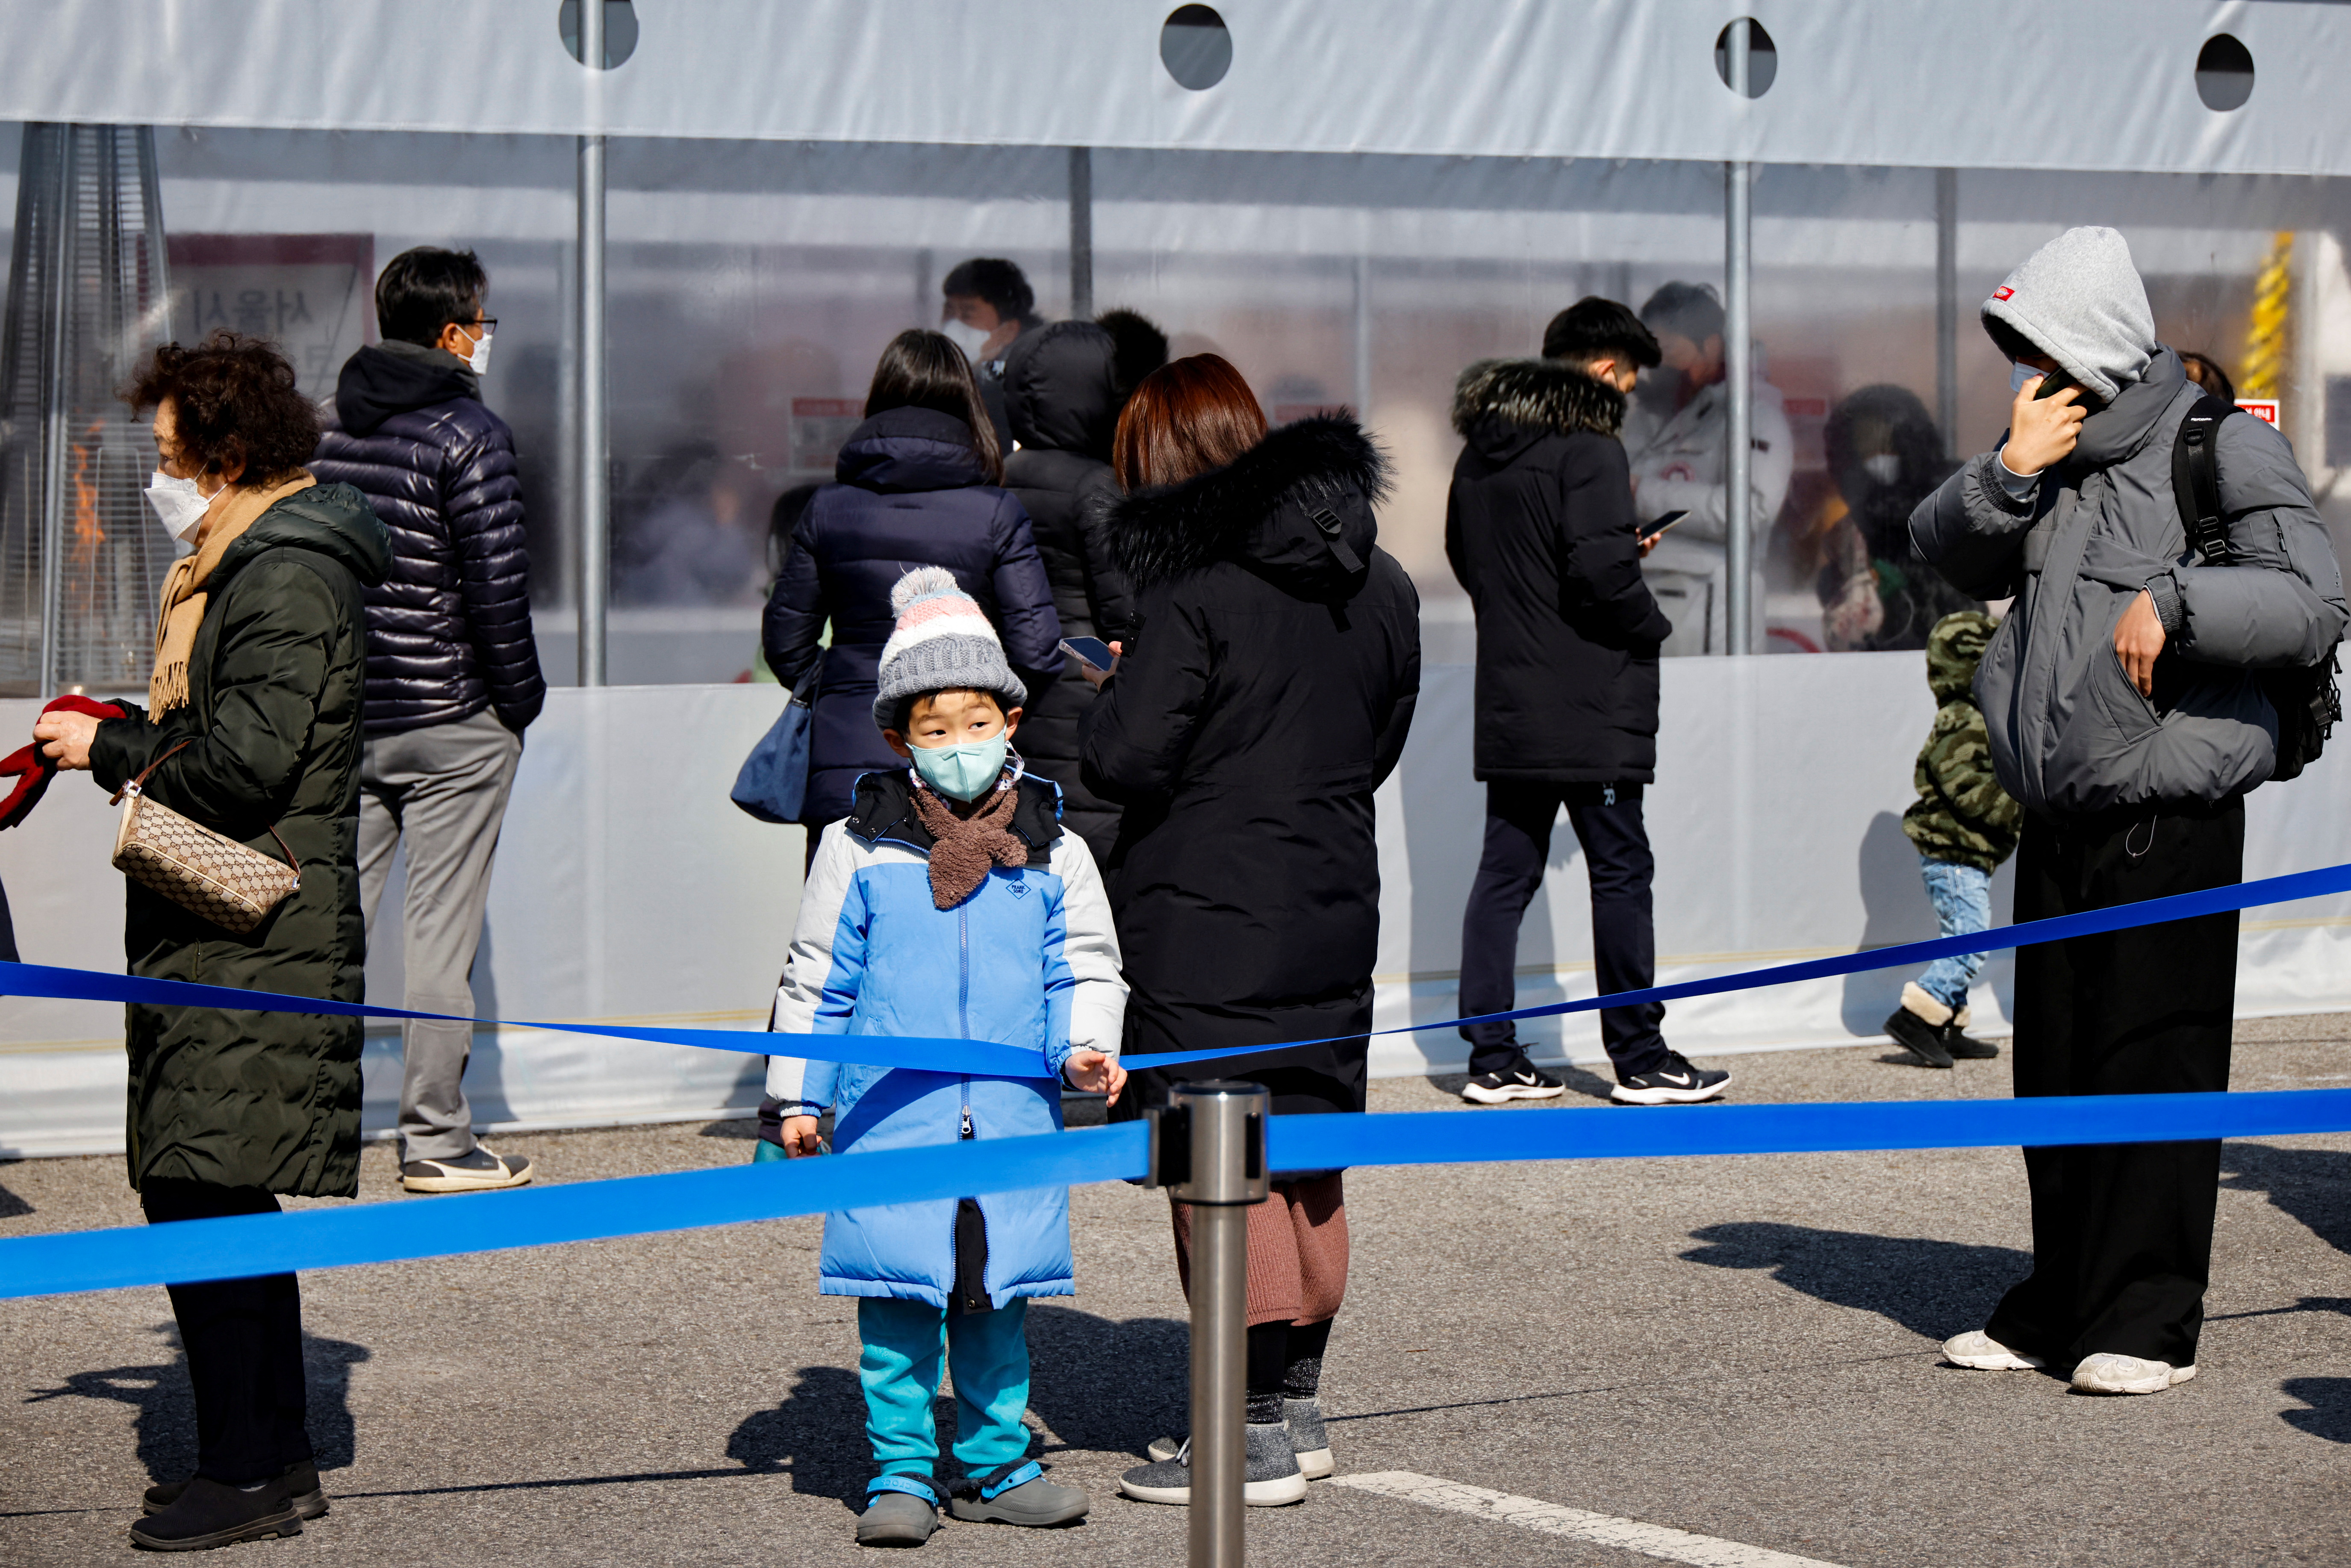 People wait in line to undergo the COVID-19 test at a temporary testing site set up in Seoul